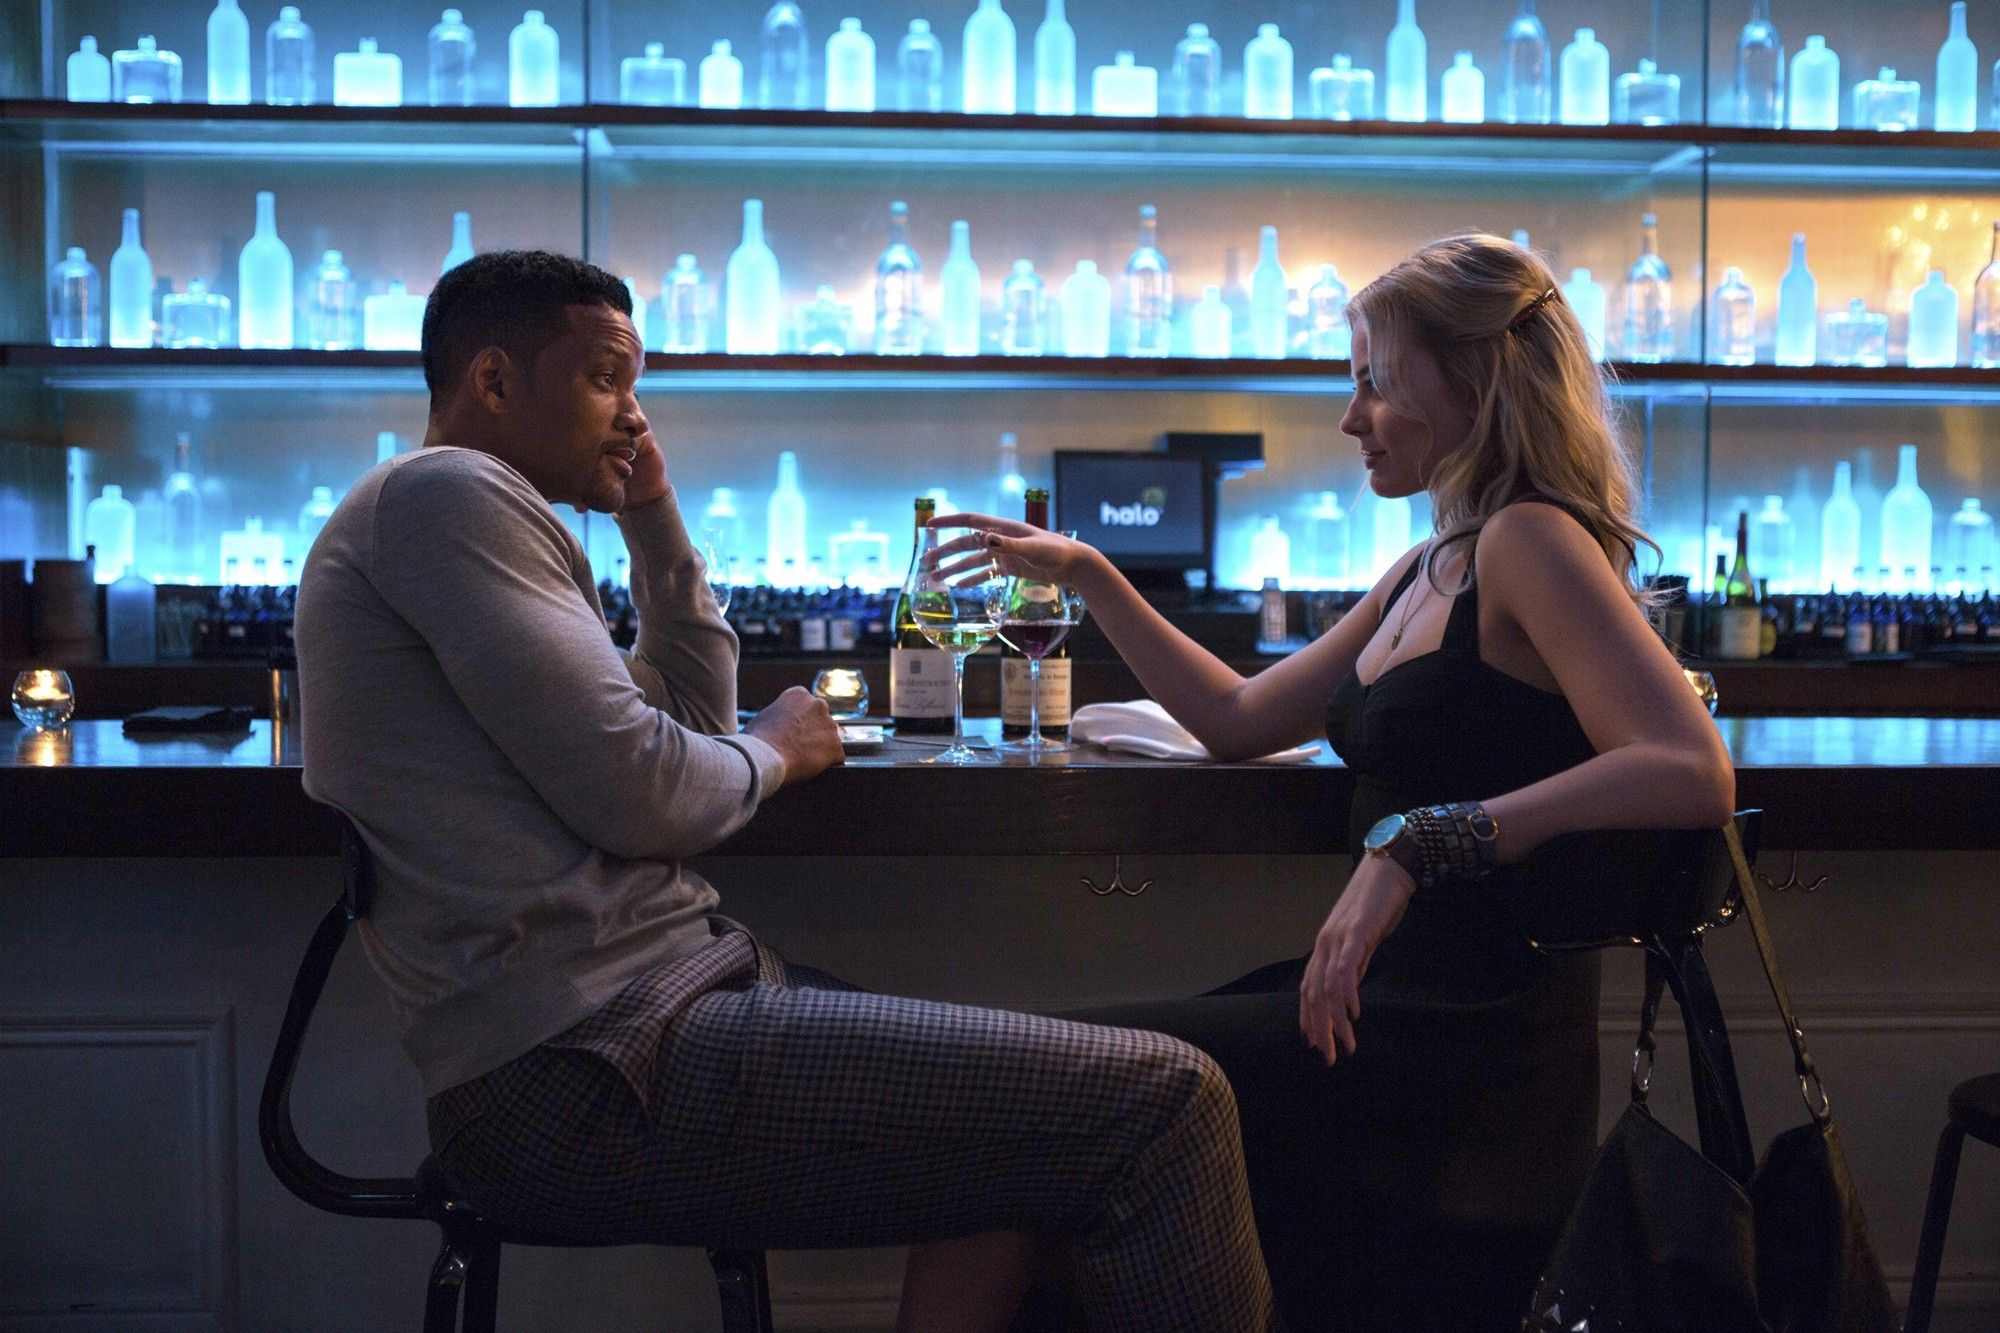 Will Smith stars as Nicky and Margot Robbie stars as Jess Barrett in Warner Bros. Pictures' Focus (2015)